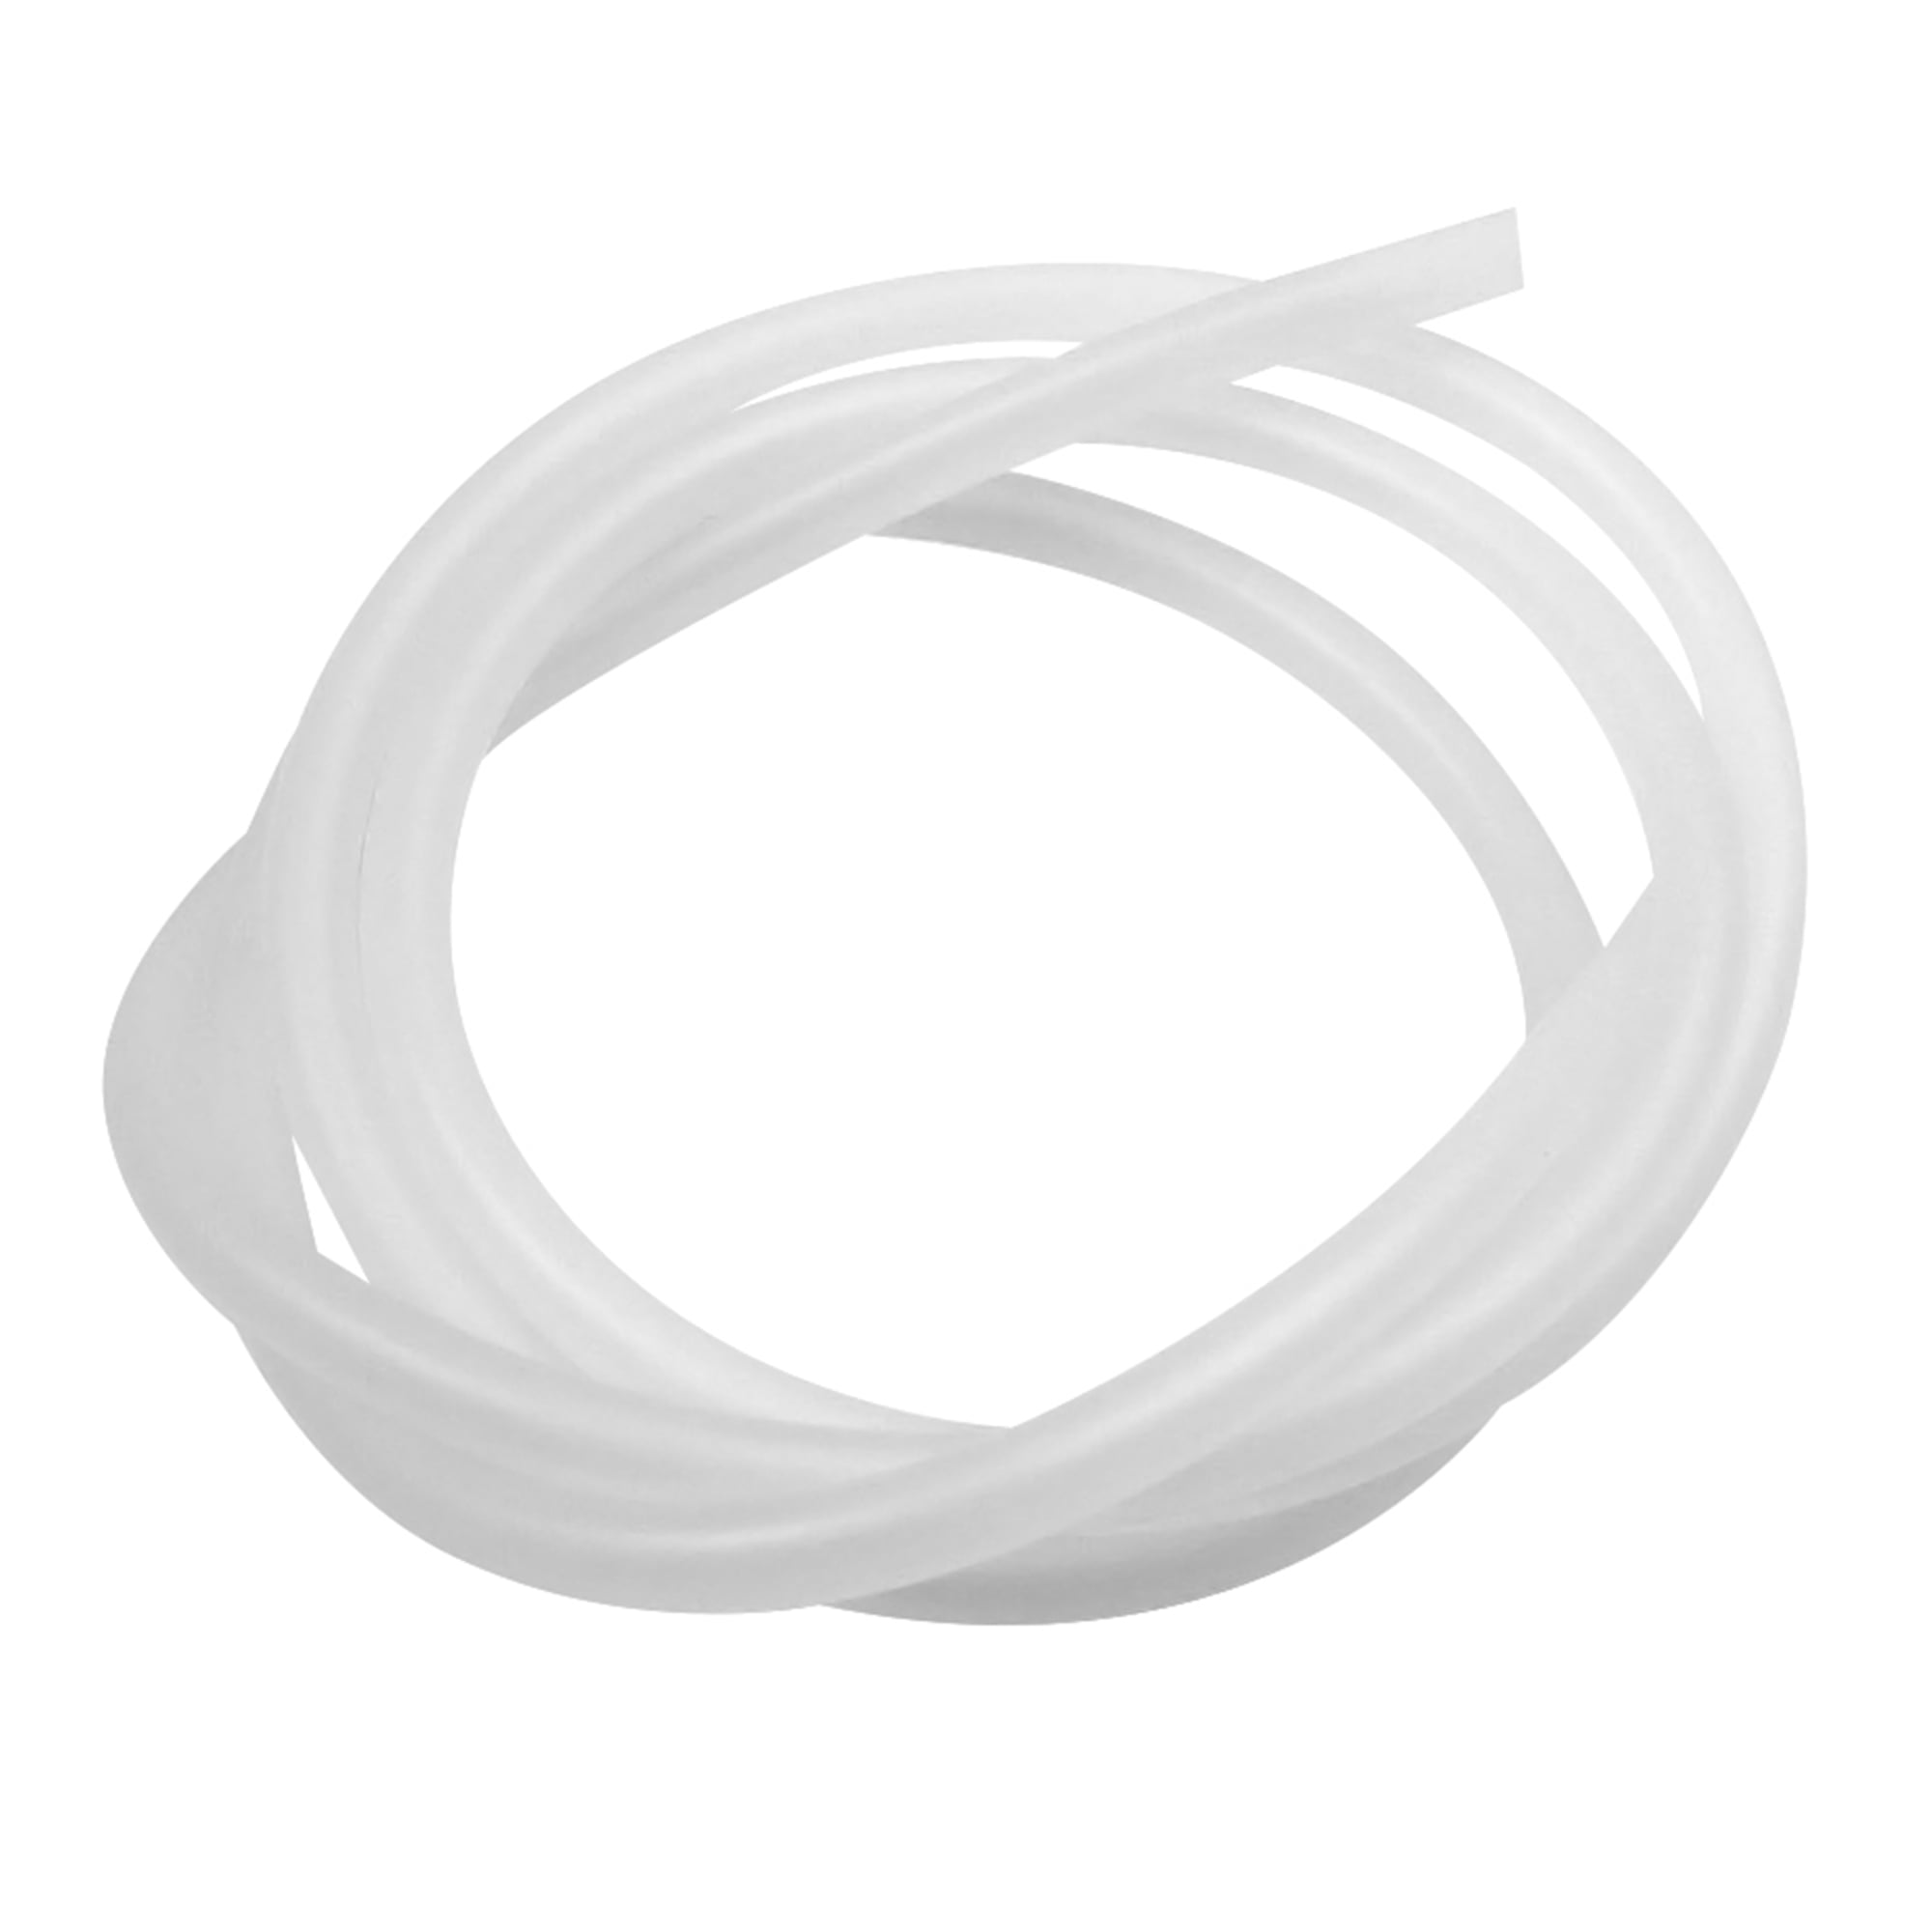 8 mm OD 6.6 ft 2 m Flexible Silicone Rubber Tube Air Hose Tube for Pump Transfer Transparent ID x 5/16 inch 4 mm Silicone Tube 5/32 inch 